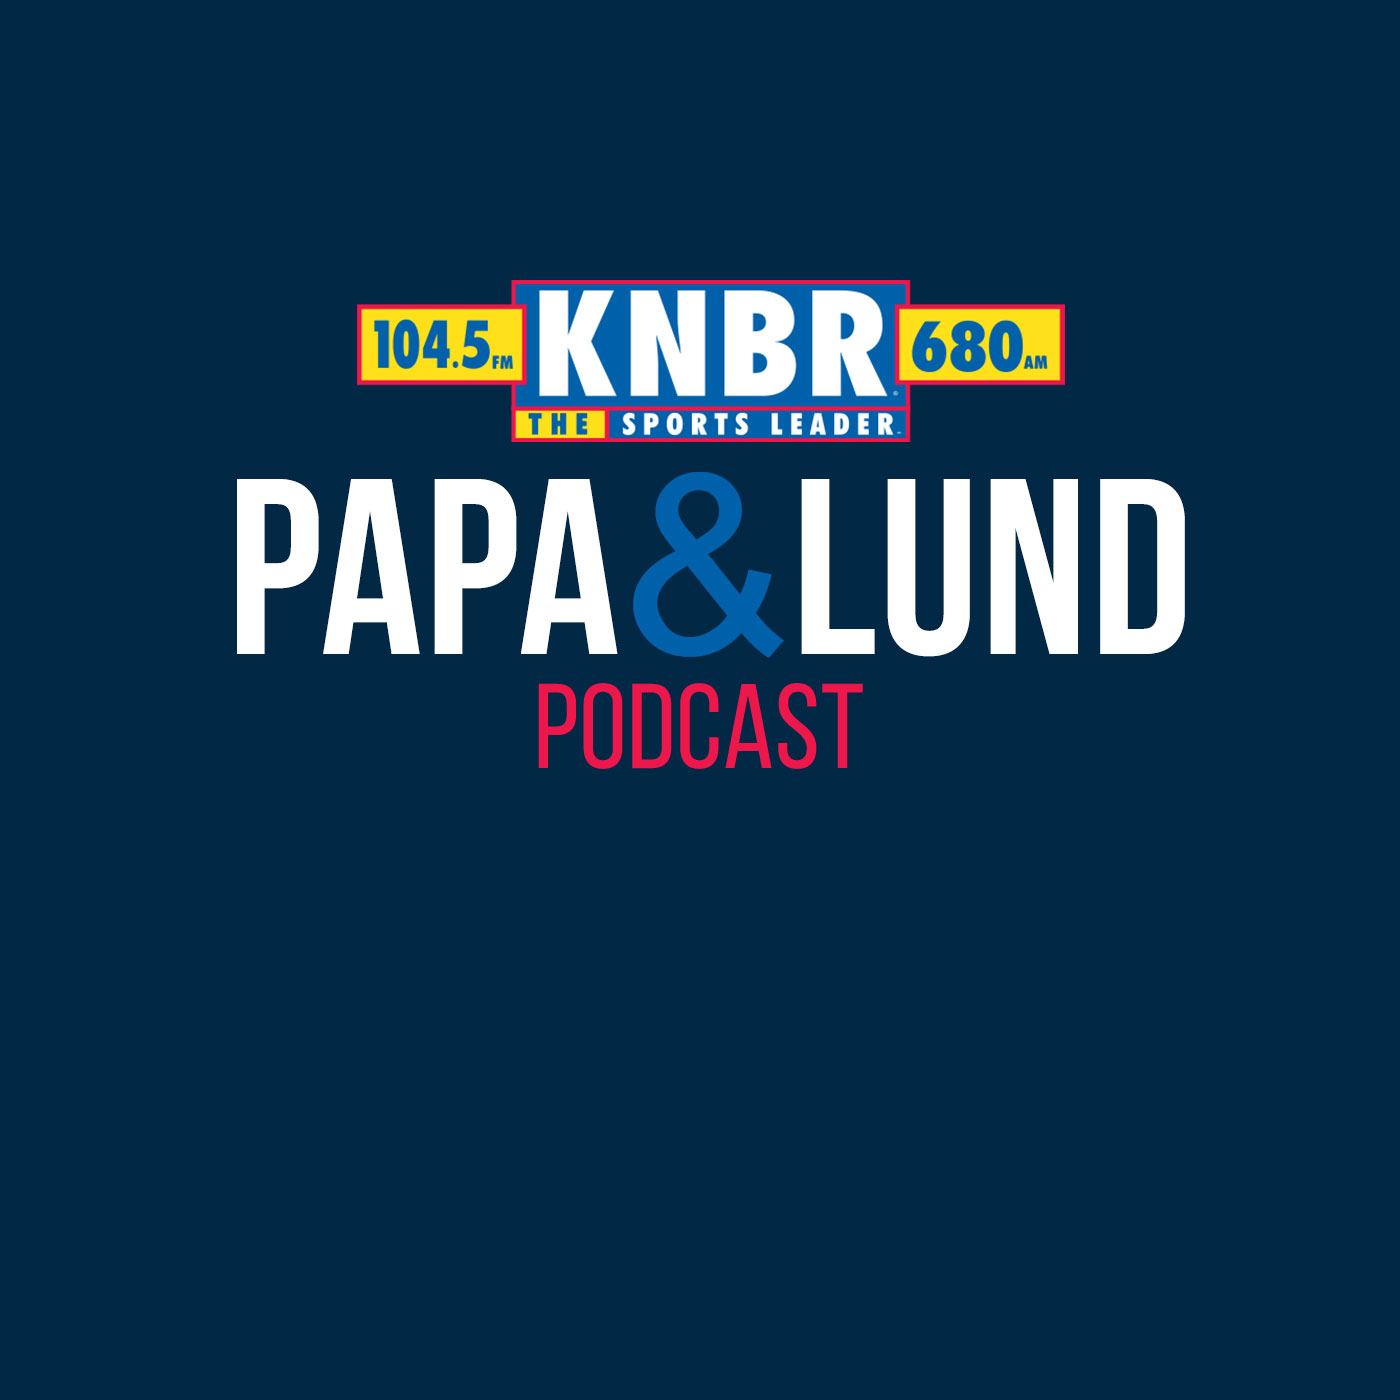 10-21 Mitch Holthus joins Papa & Lund to preview the Superbowl Rematch this Sunday between the 49ers and the Chiefs